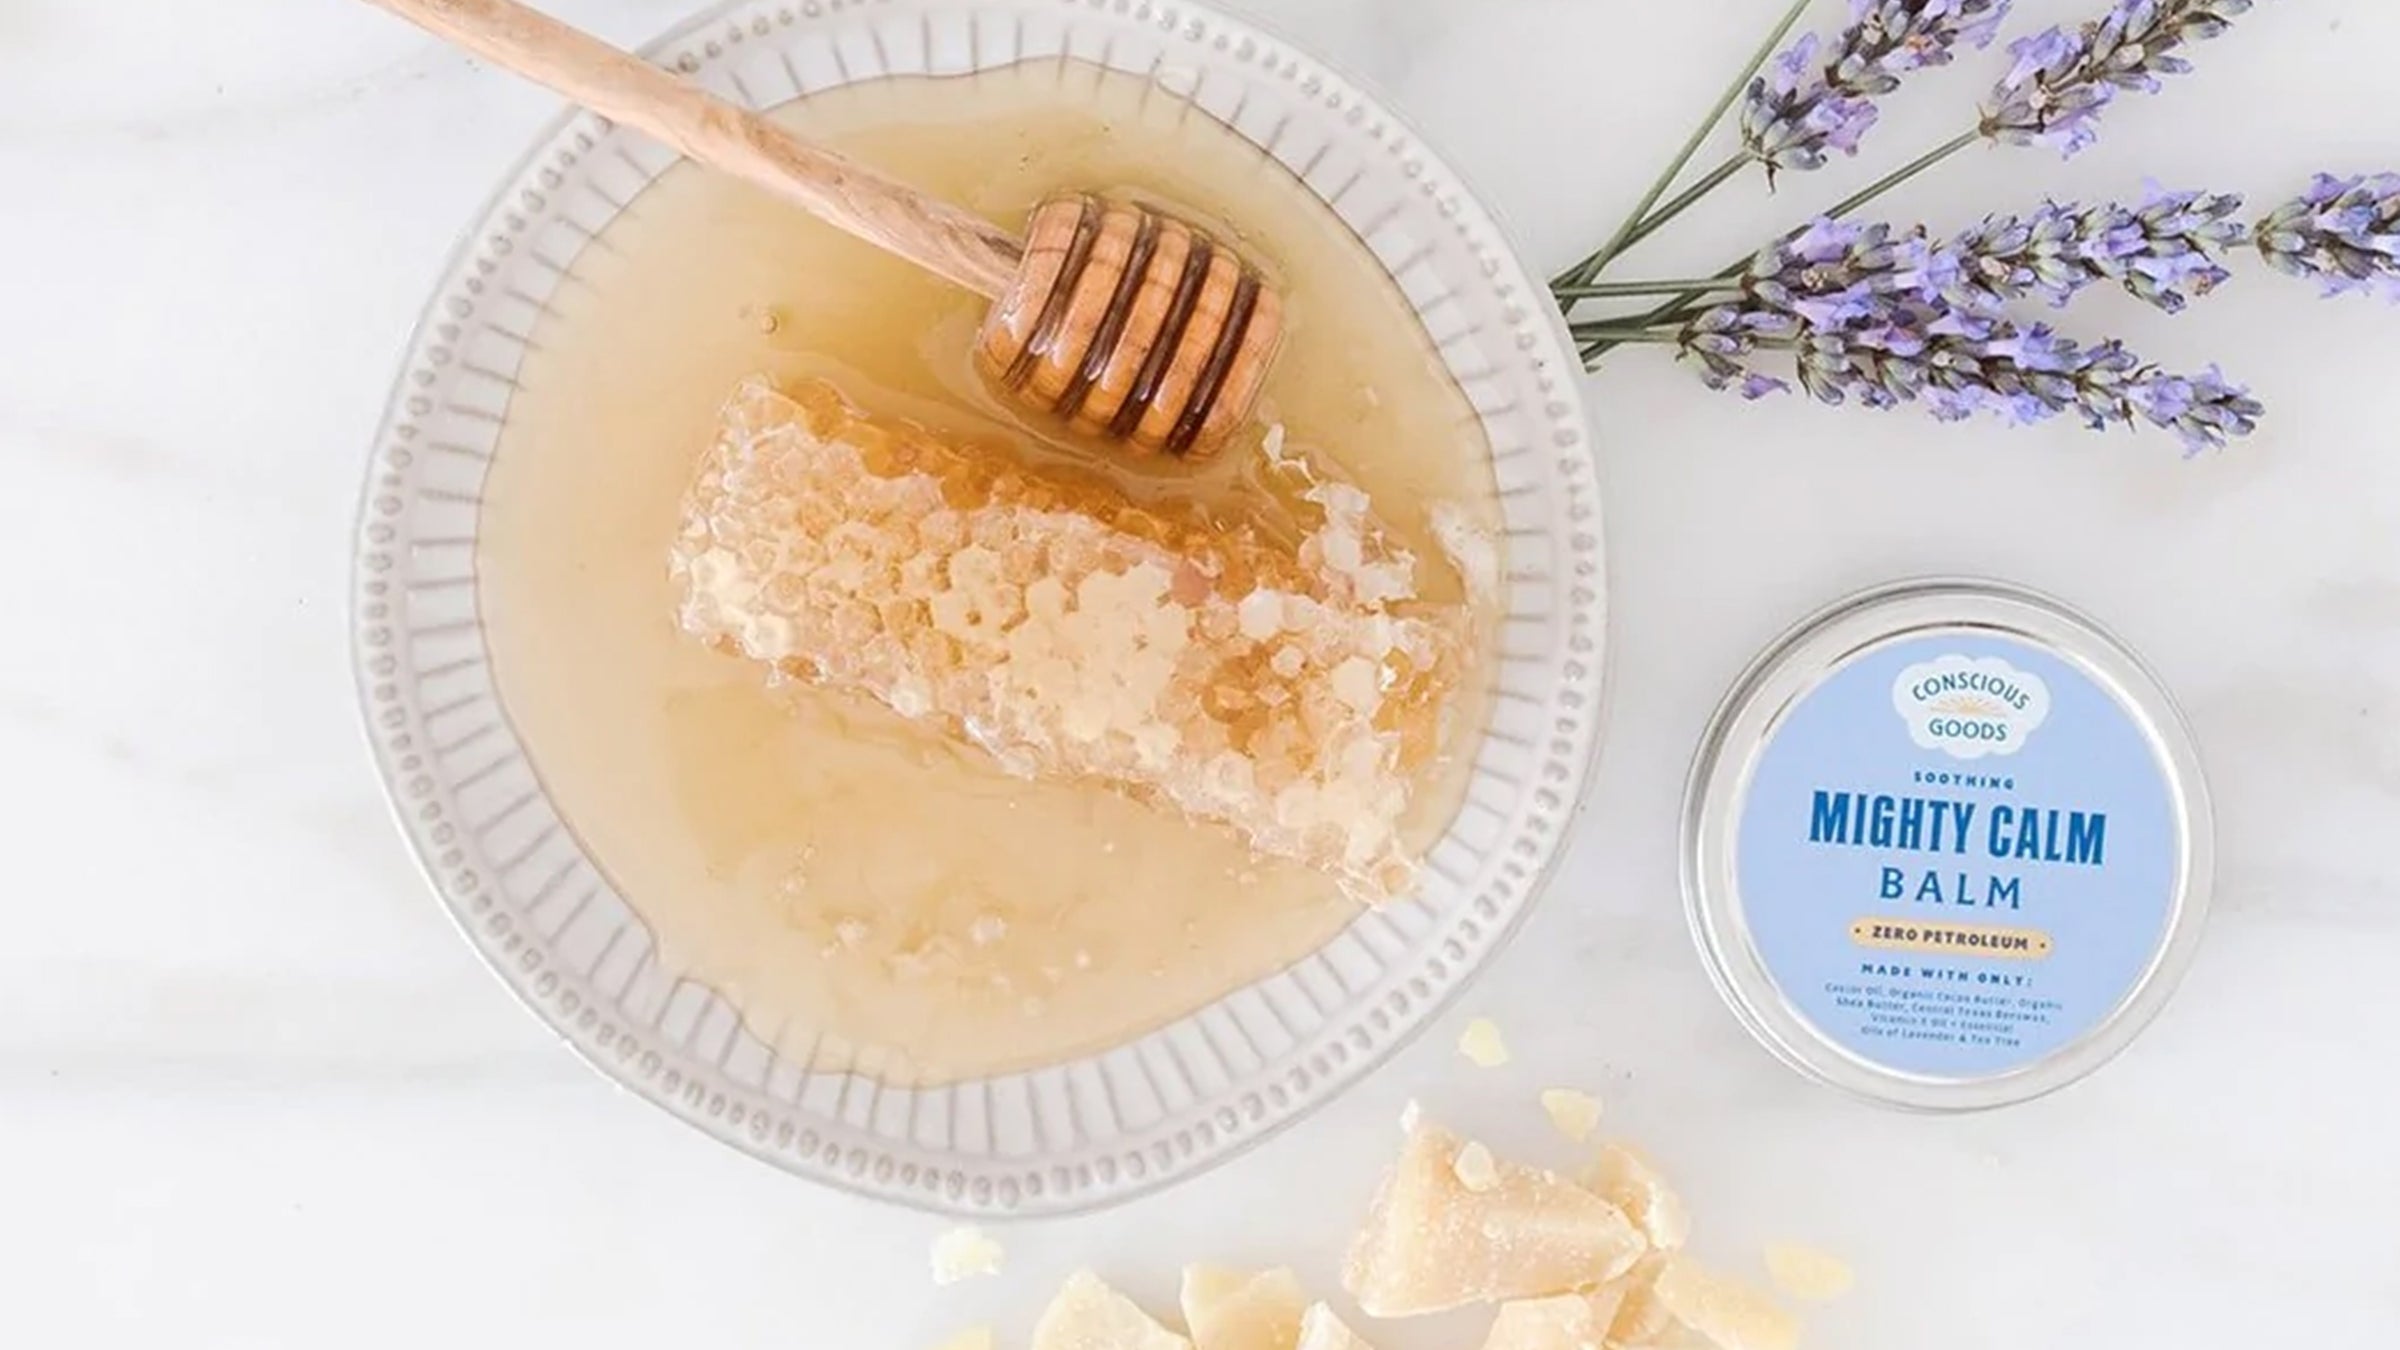 Conscious Goods Mighty Calm balm on marble countertop next to honey and lavendar